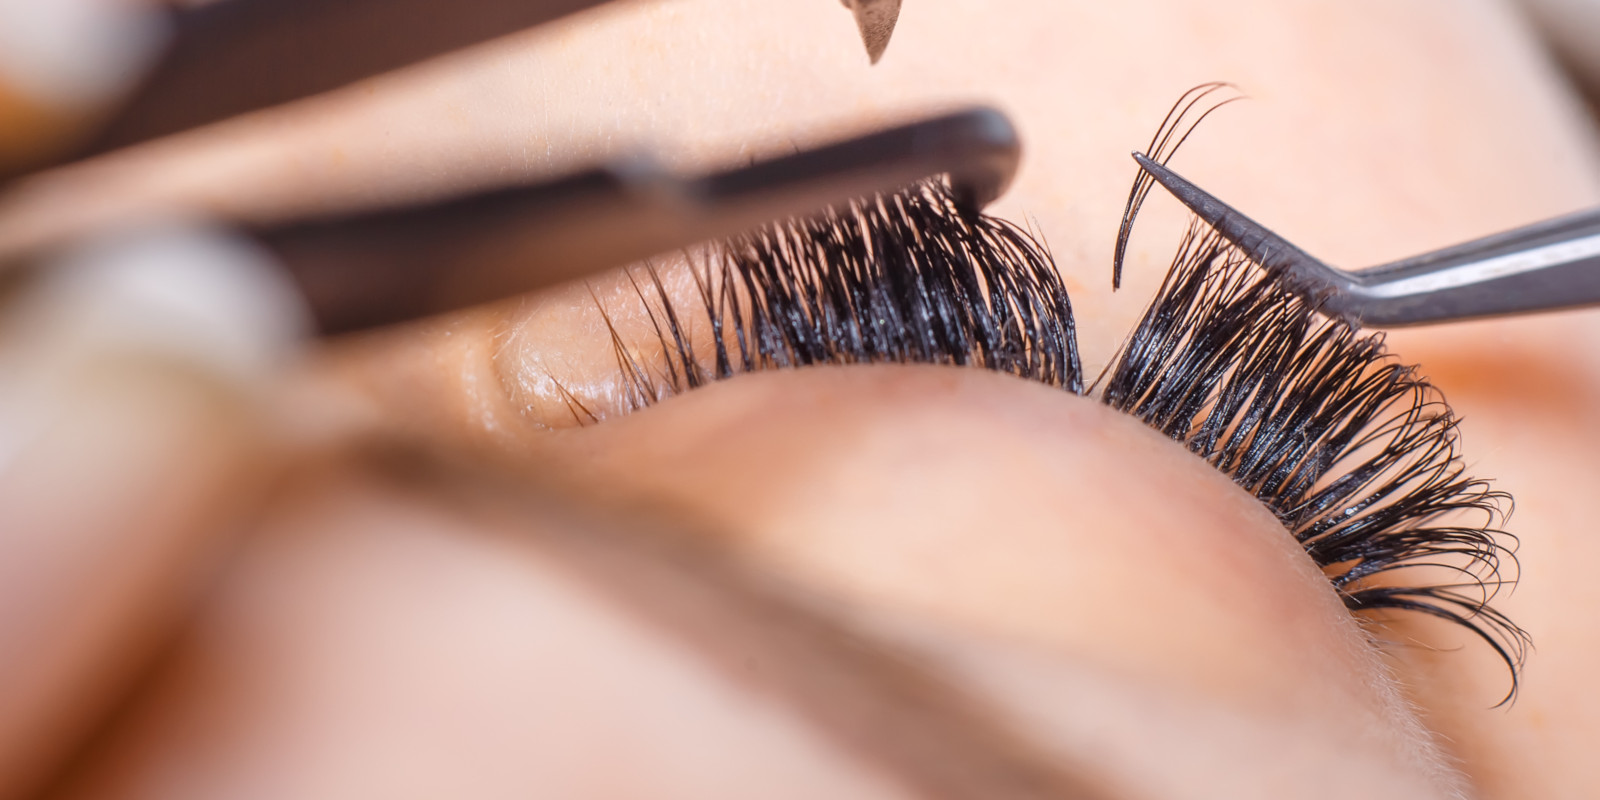 Get the Look You Want with Eyelash Extensions